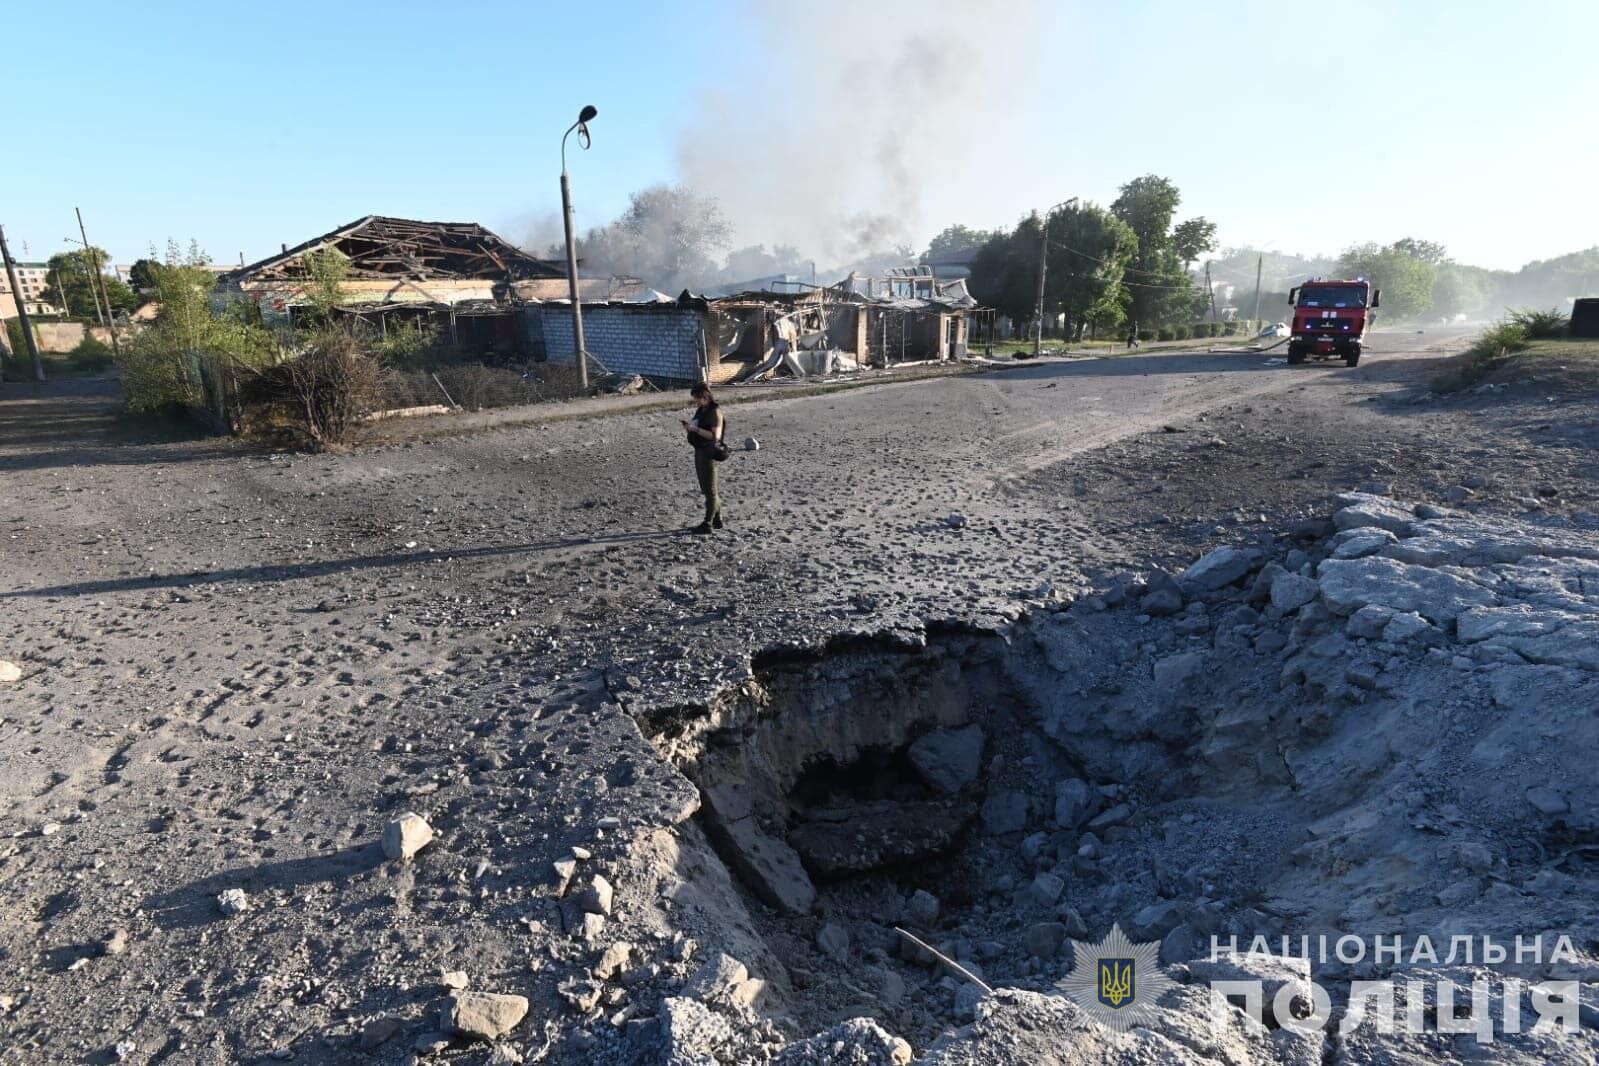 Russia shells Vilniansk in Zaporizhzhia, killing and wounding many people, including children. Photo and video